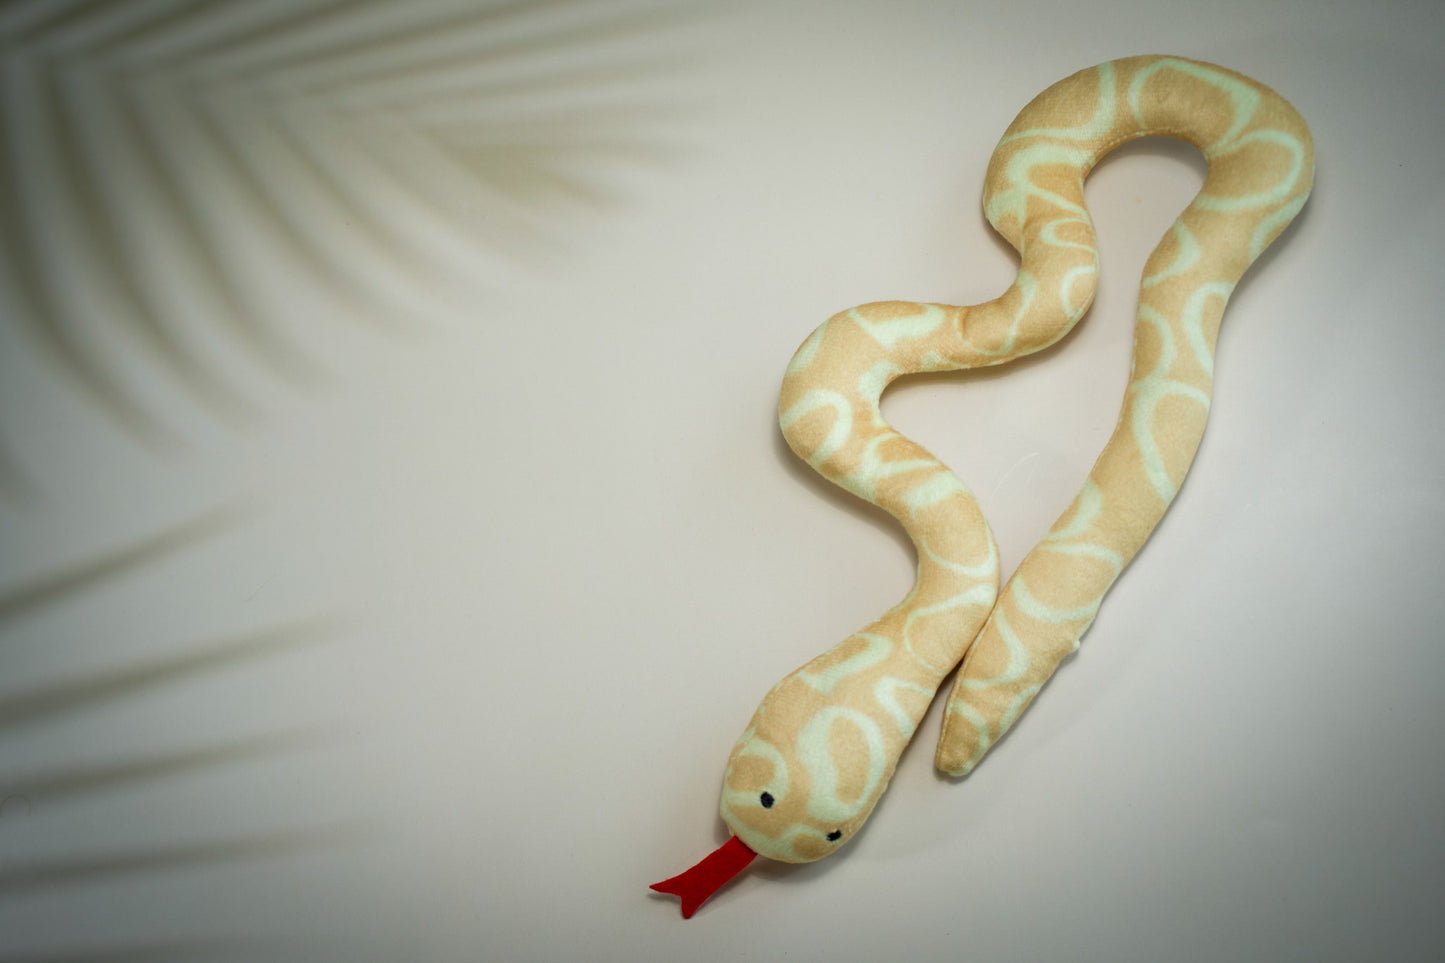 Plush snake filled with catnip and yellow and beige circular patterns.